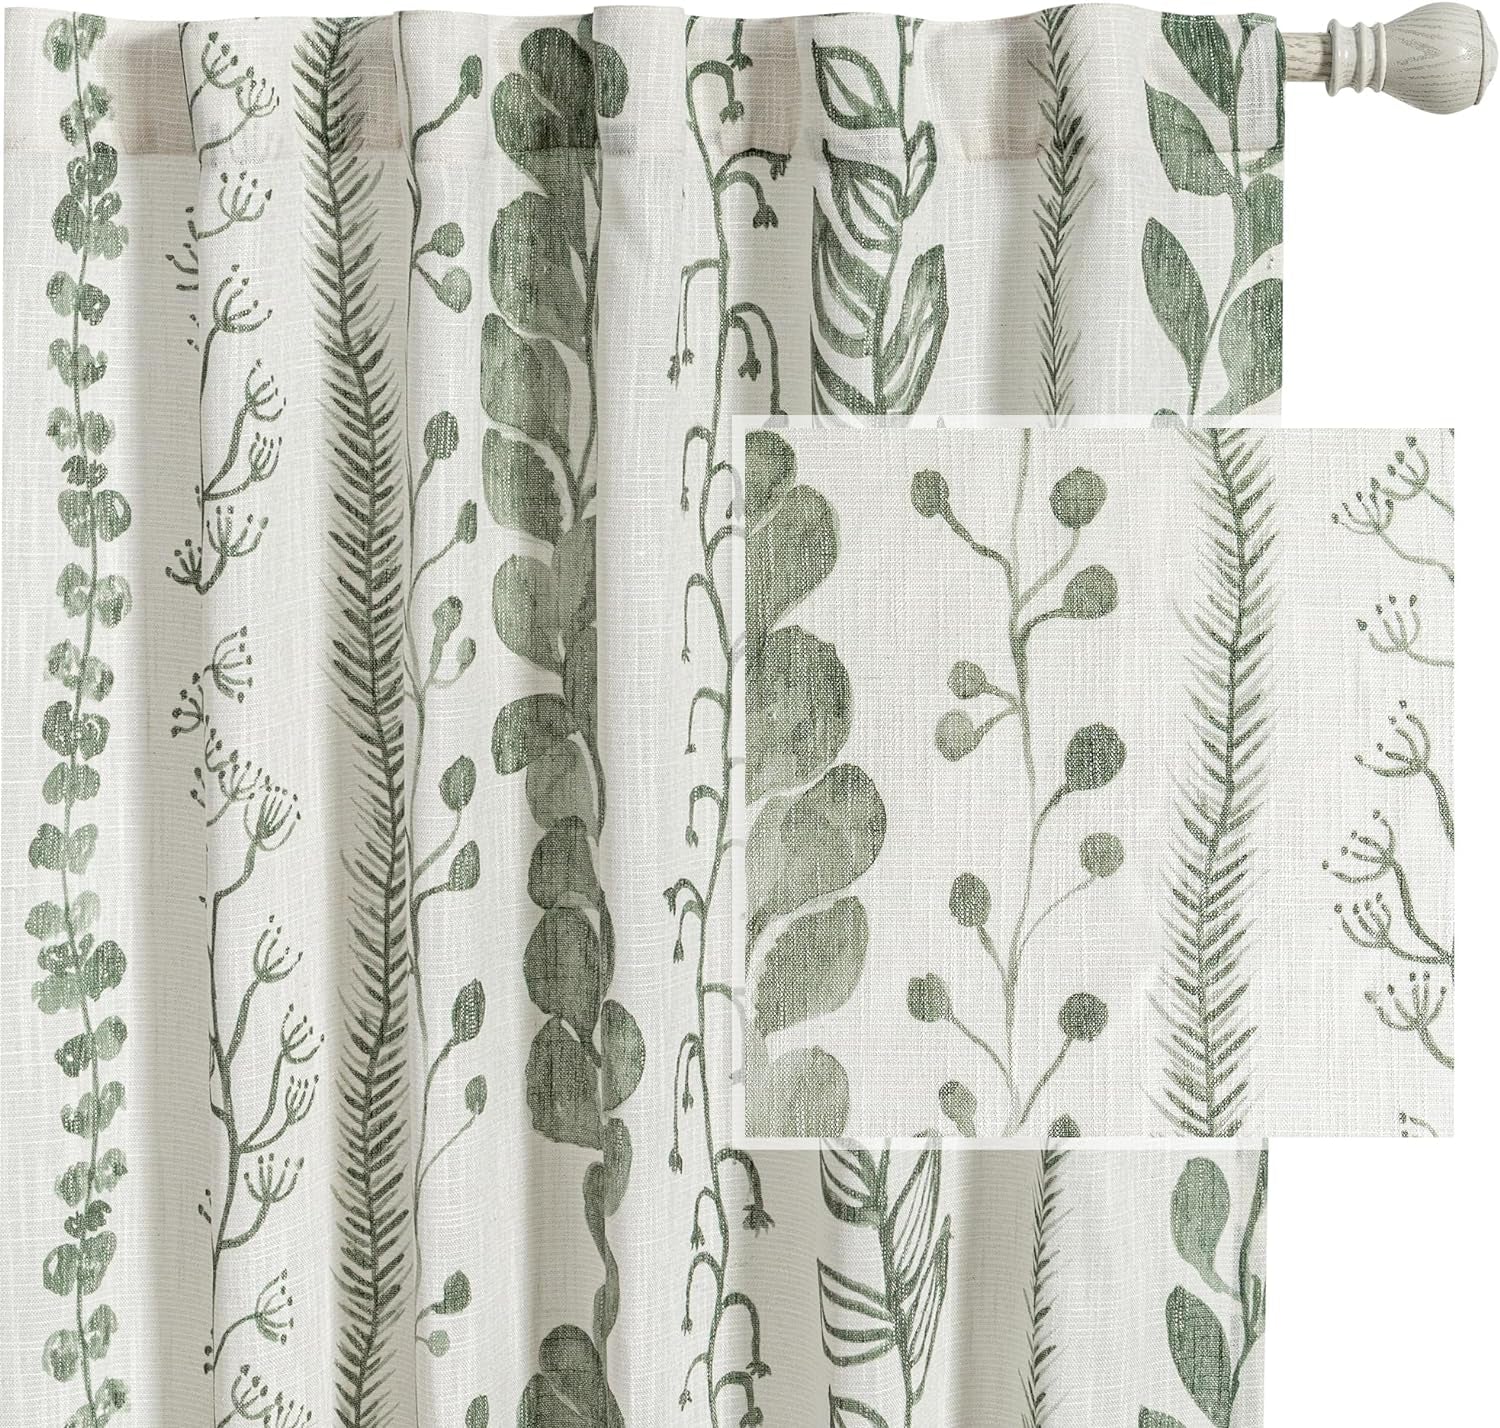 Boho Curtains for Living Room Light Filtering Privacy Protection Cotton Curtains 84 Inch Length 2 Panels Bohemian Linen Style Back Tab Window Leaf Print Classical Drapes for Dining Room  MEETSKY Leaves-Sage 50"W X 84"L 